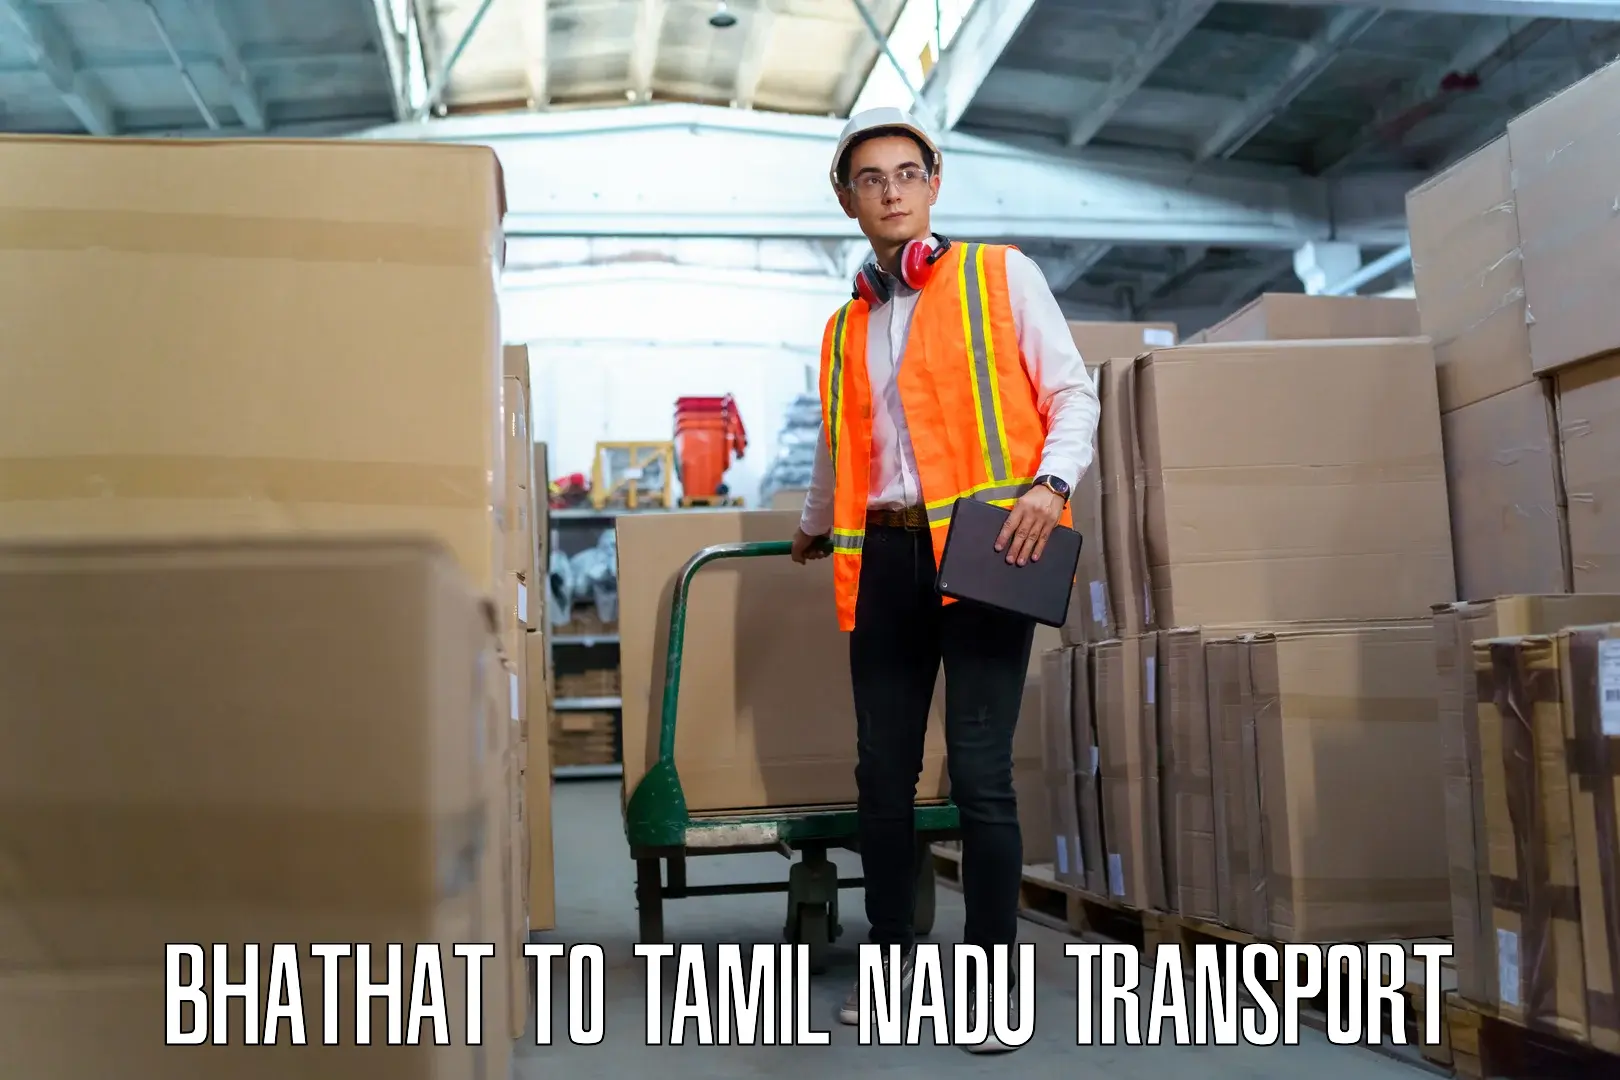 Nearby transport service Bhathat to Tamil Nadu